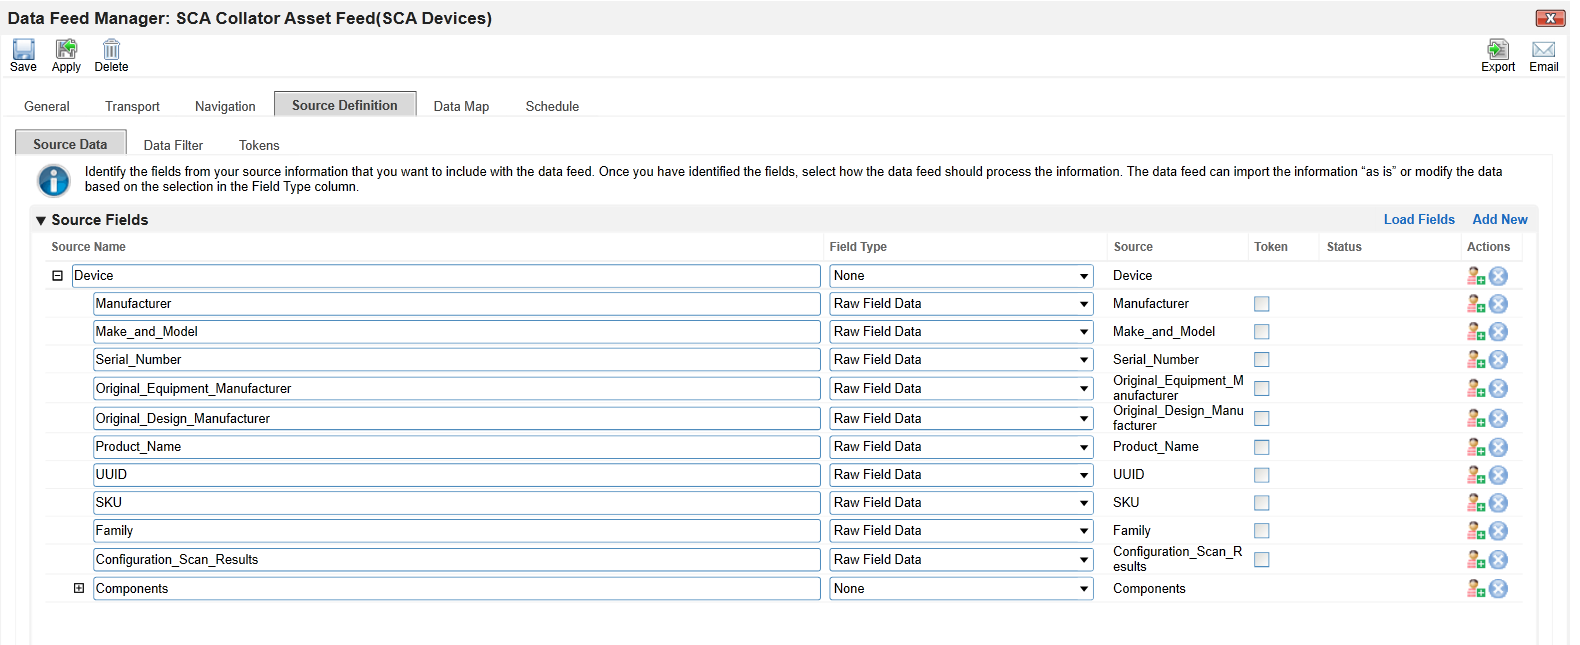 Screenshot of the Source Data sub-tab in the Source Definition tab in the Data Feed Manager